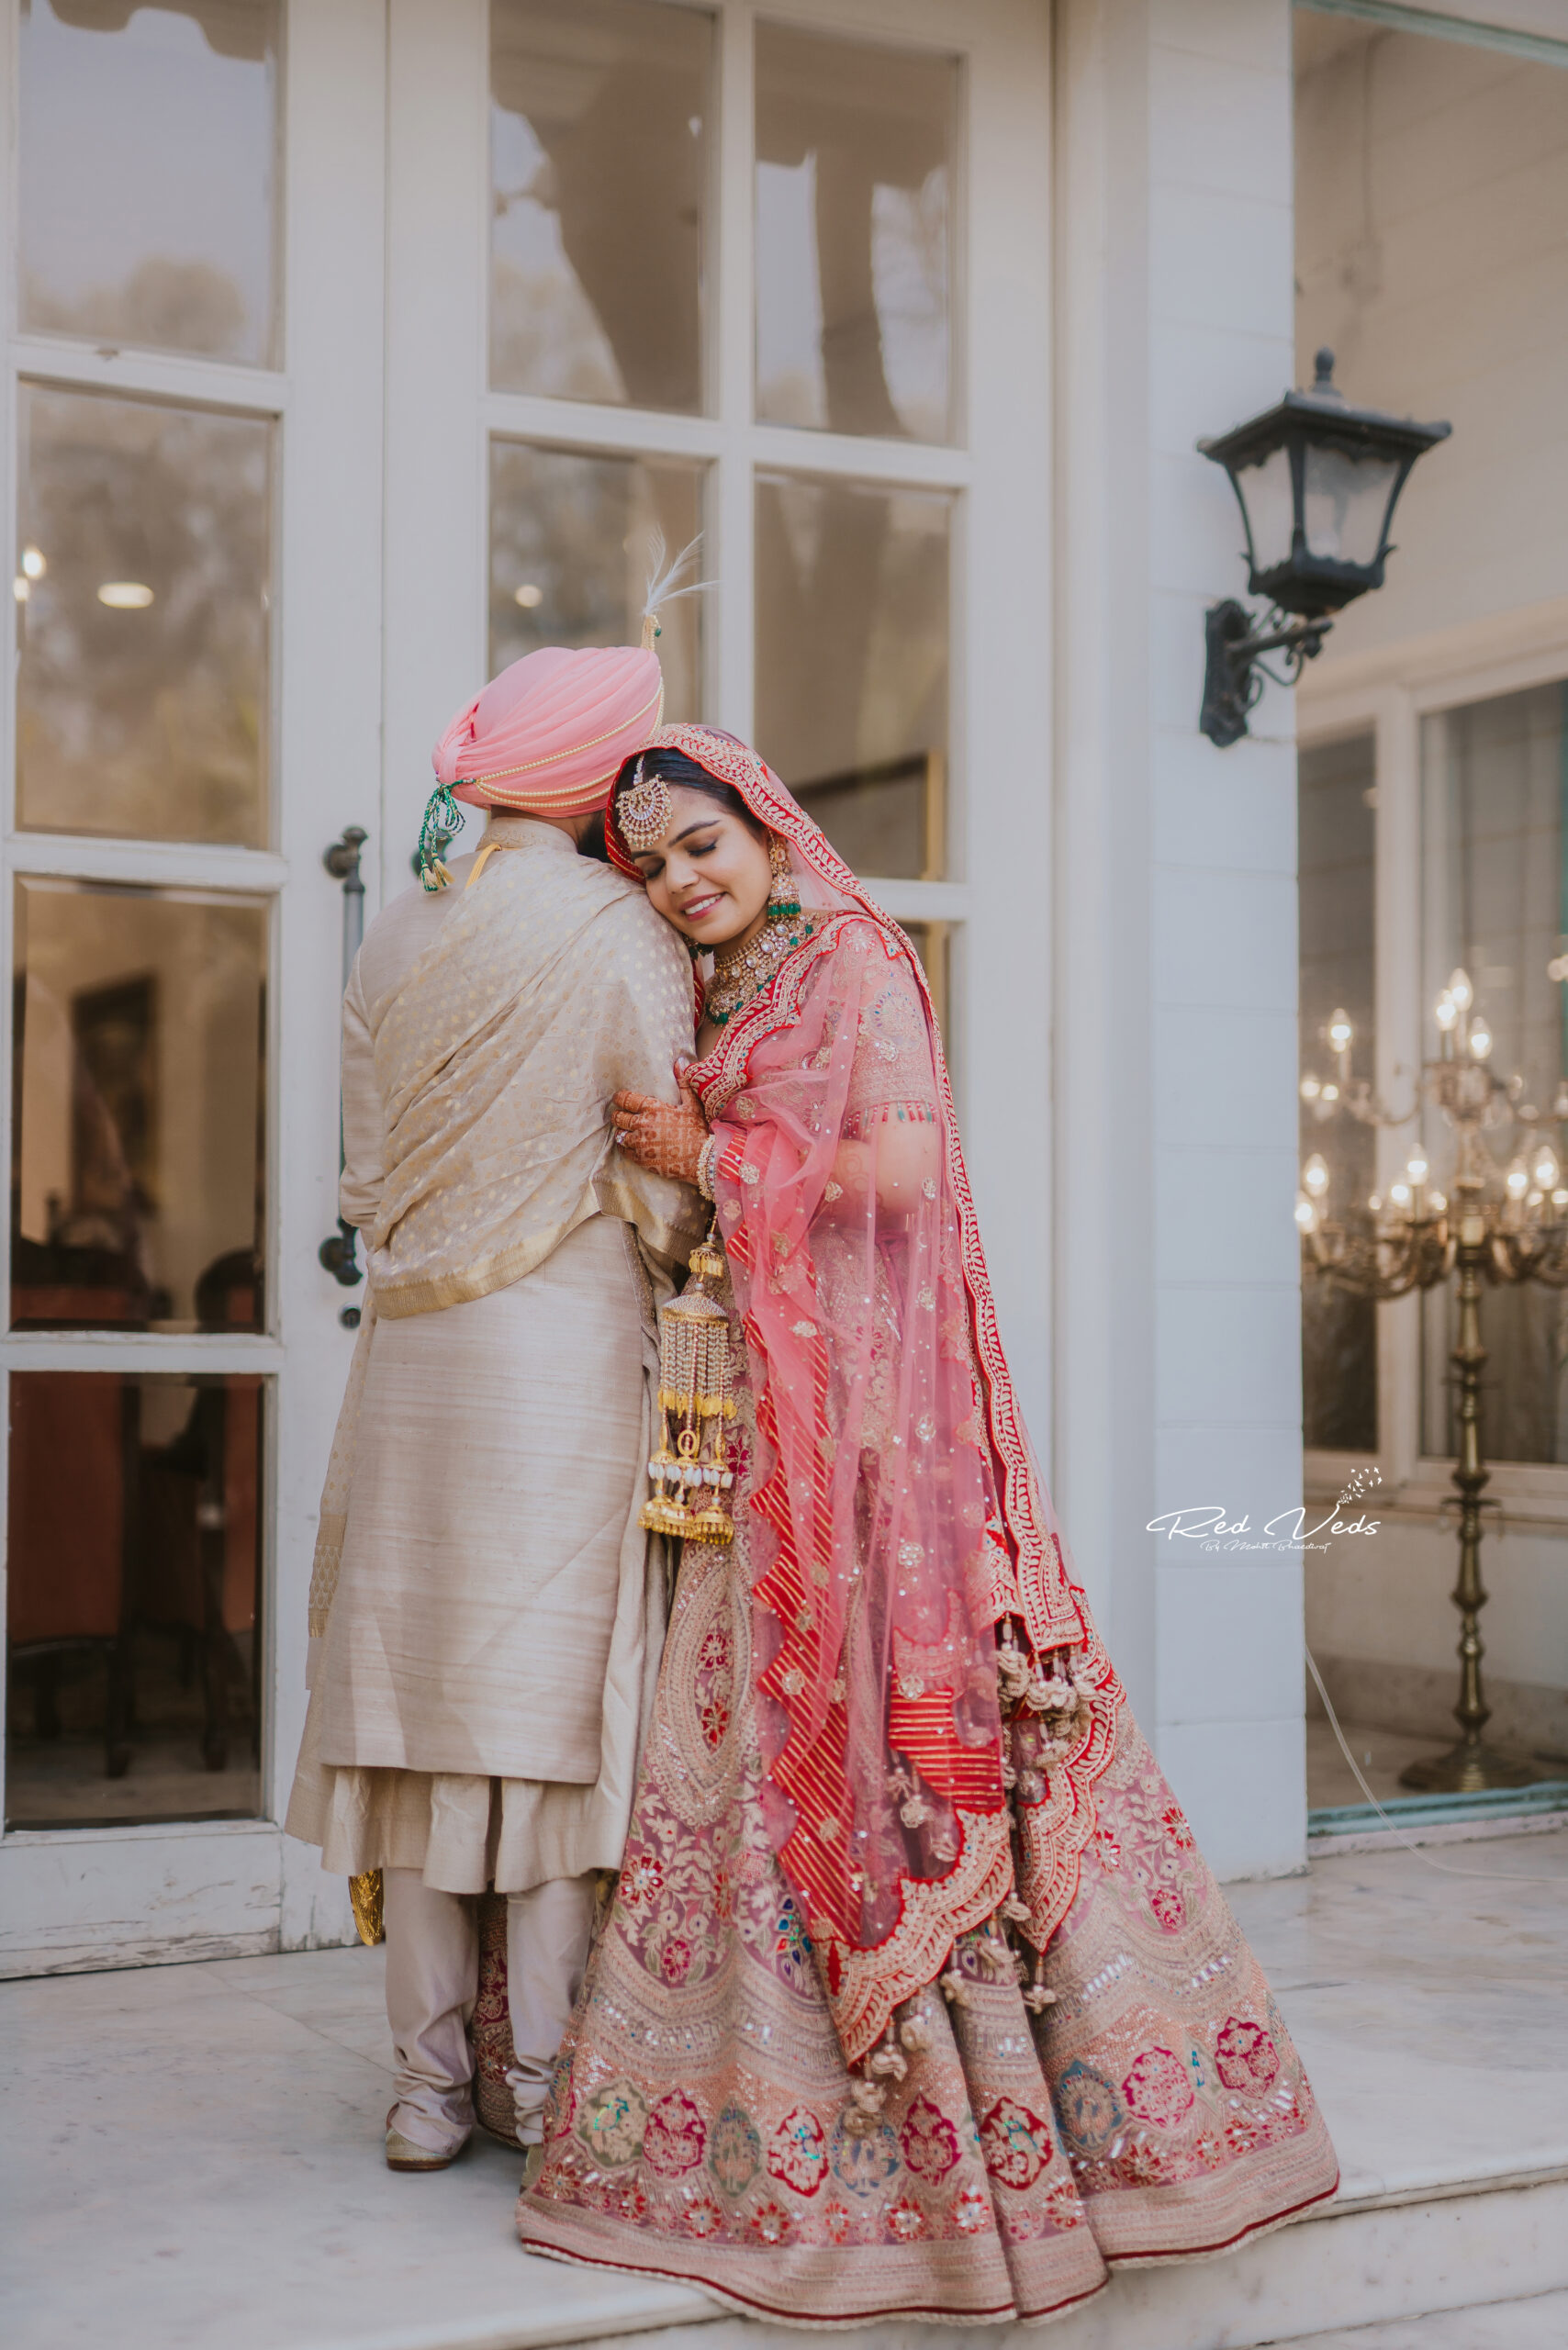 Our Bengali Bride Shefali's Wedding Pictures Are A Feast To The Soring  Eyes! | Indian wedding poses, Wedding couple poses, Indian bride poses